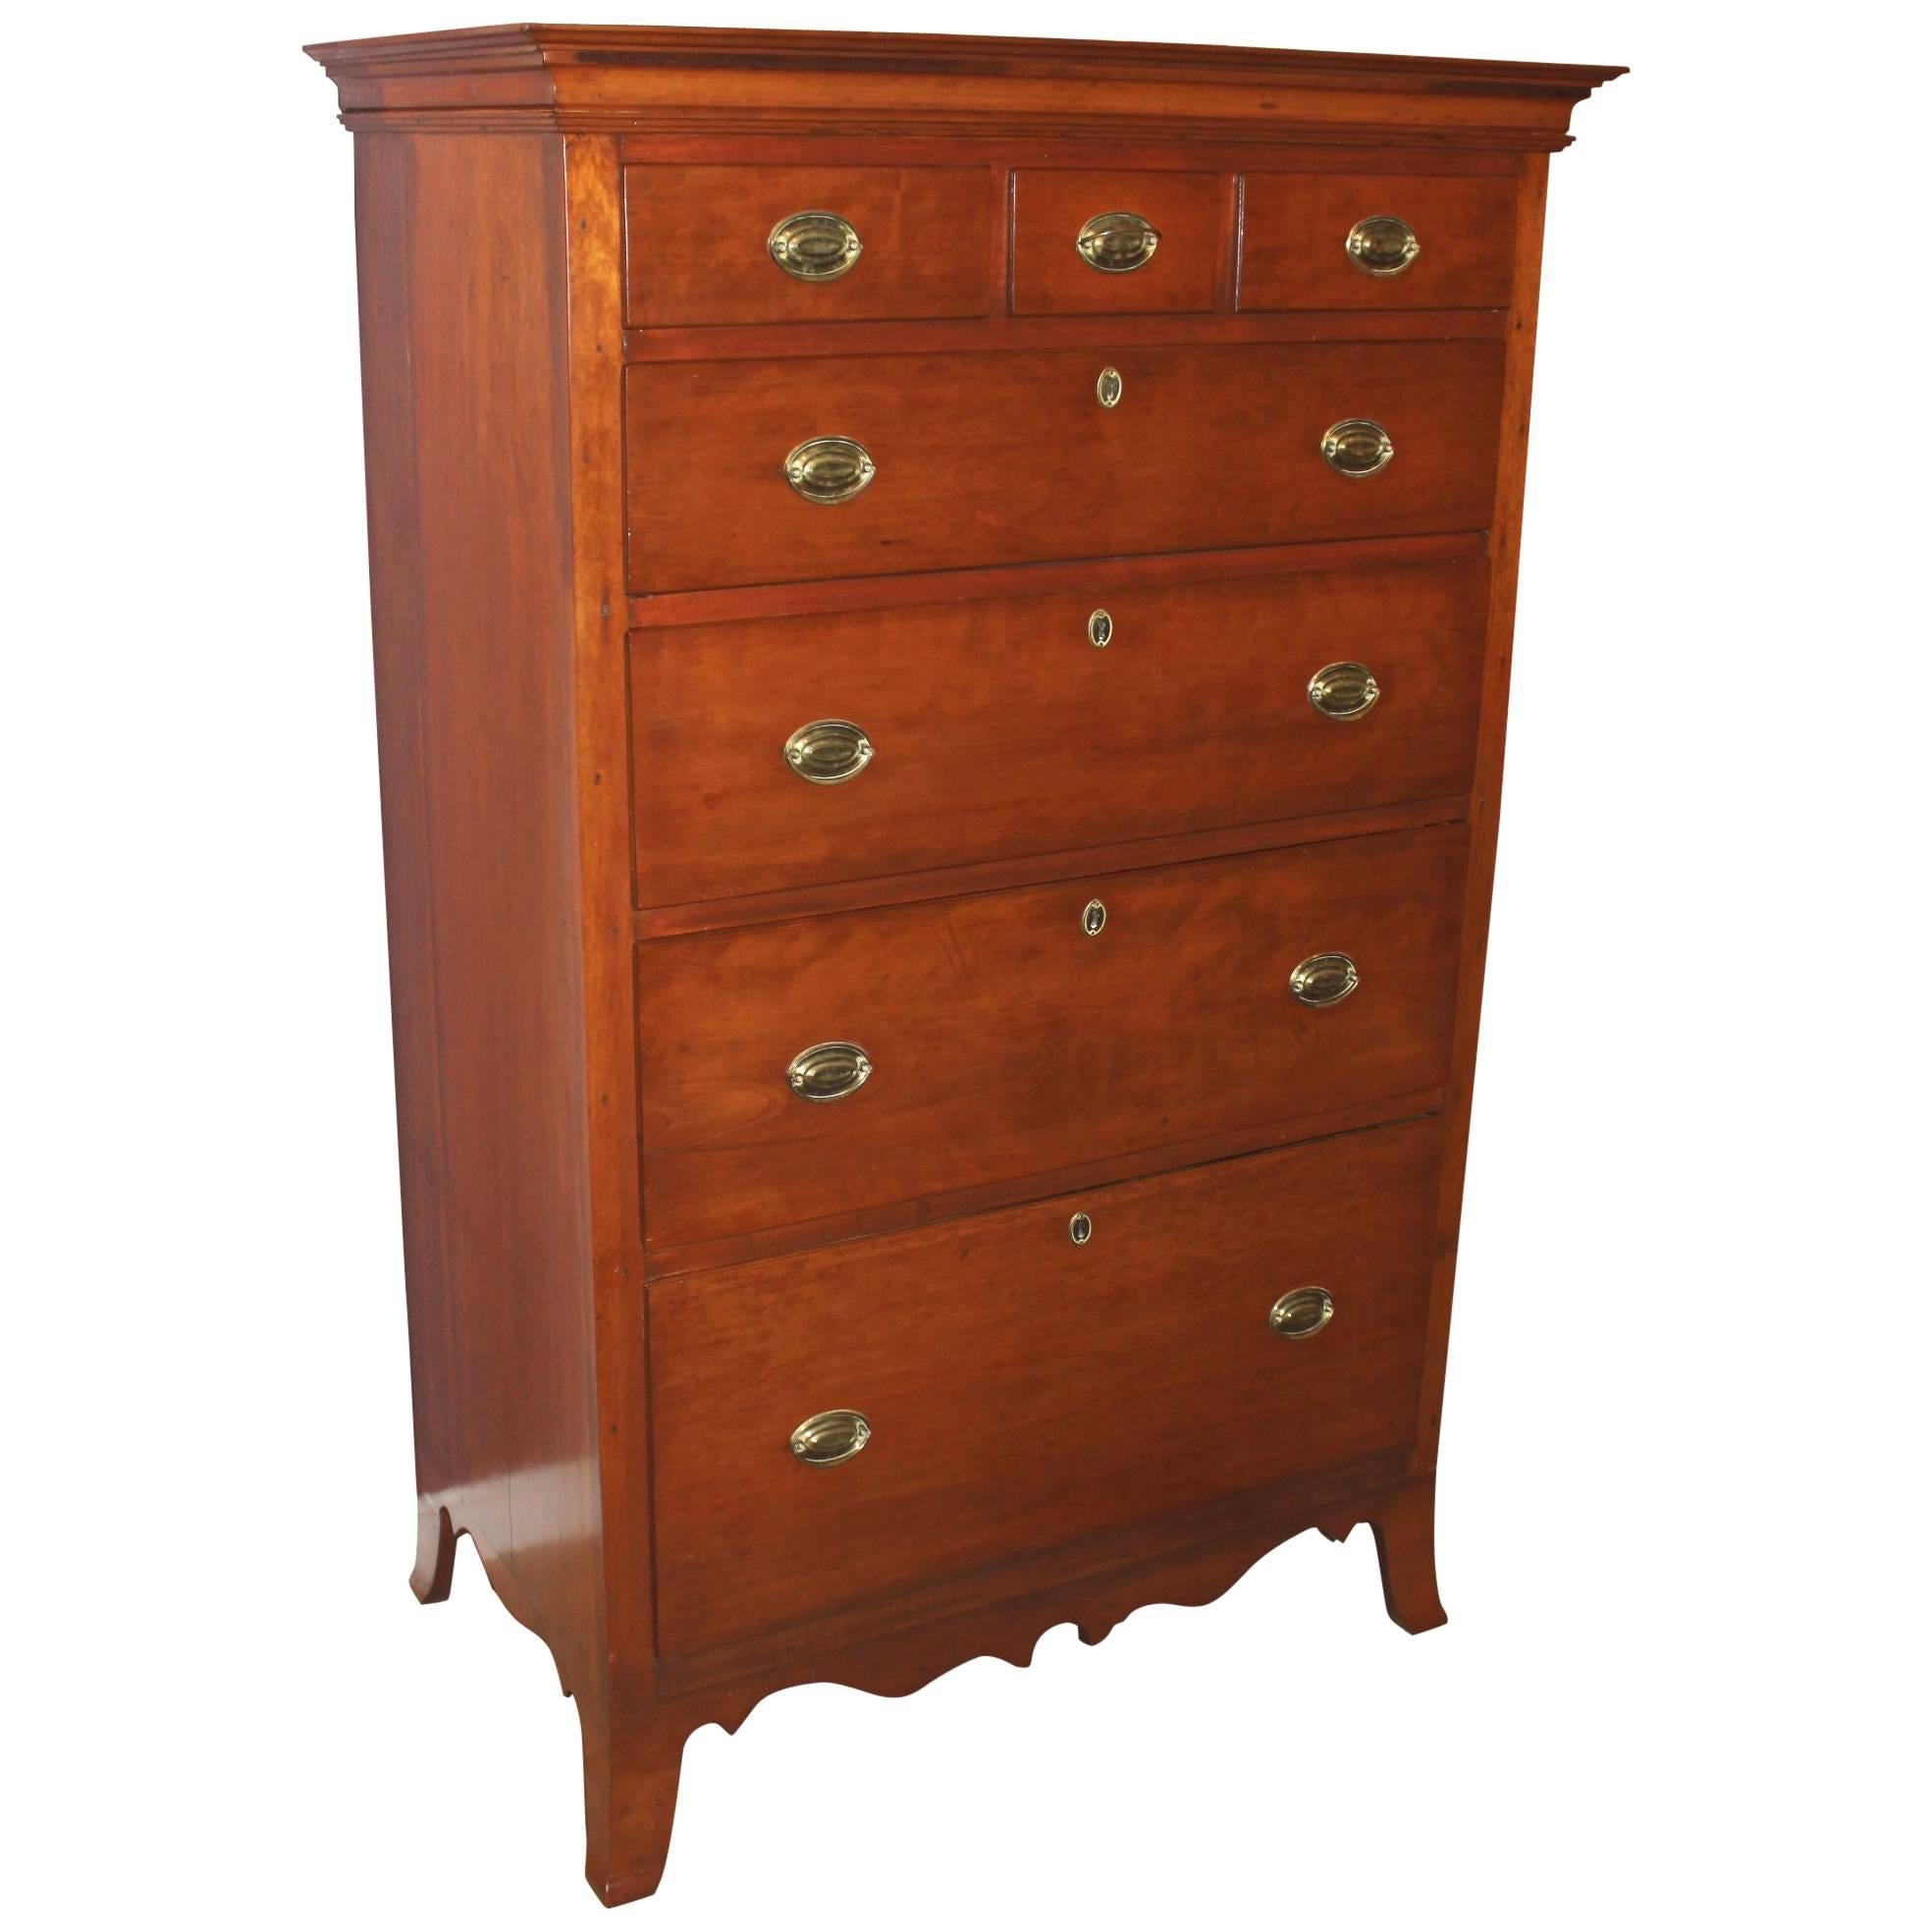 18th Century Pennsylvania Cherry Tall Chest with Great Proportions